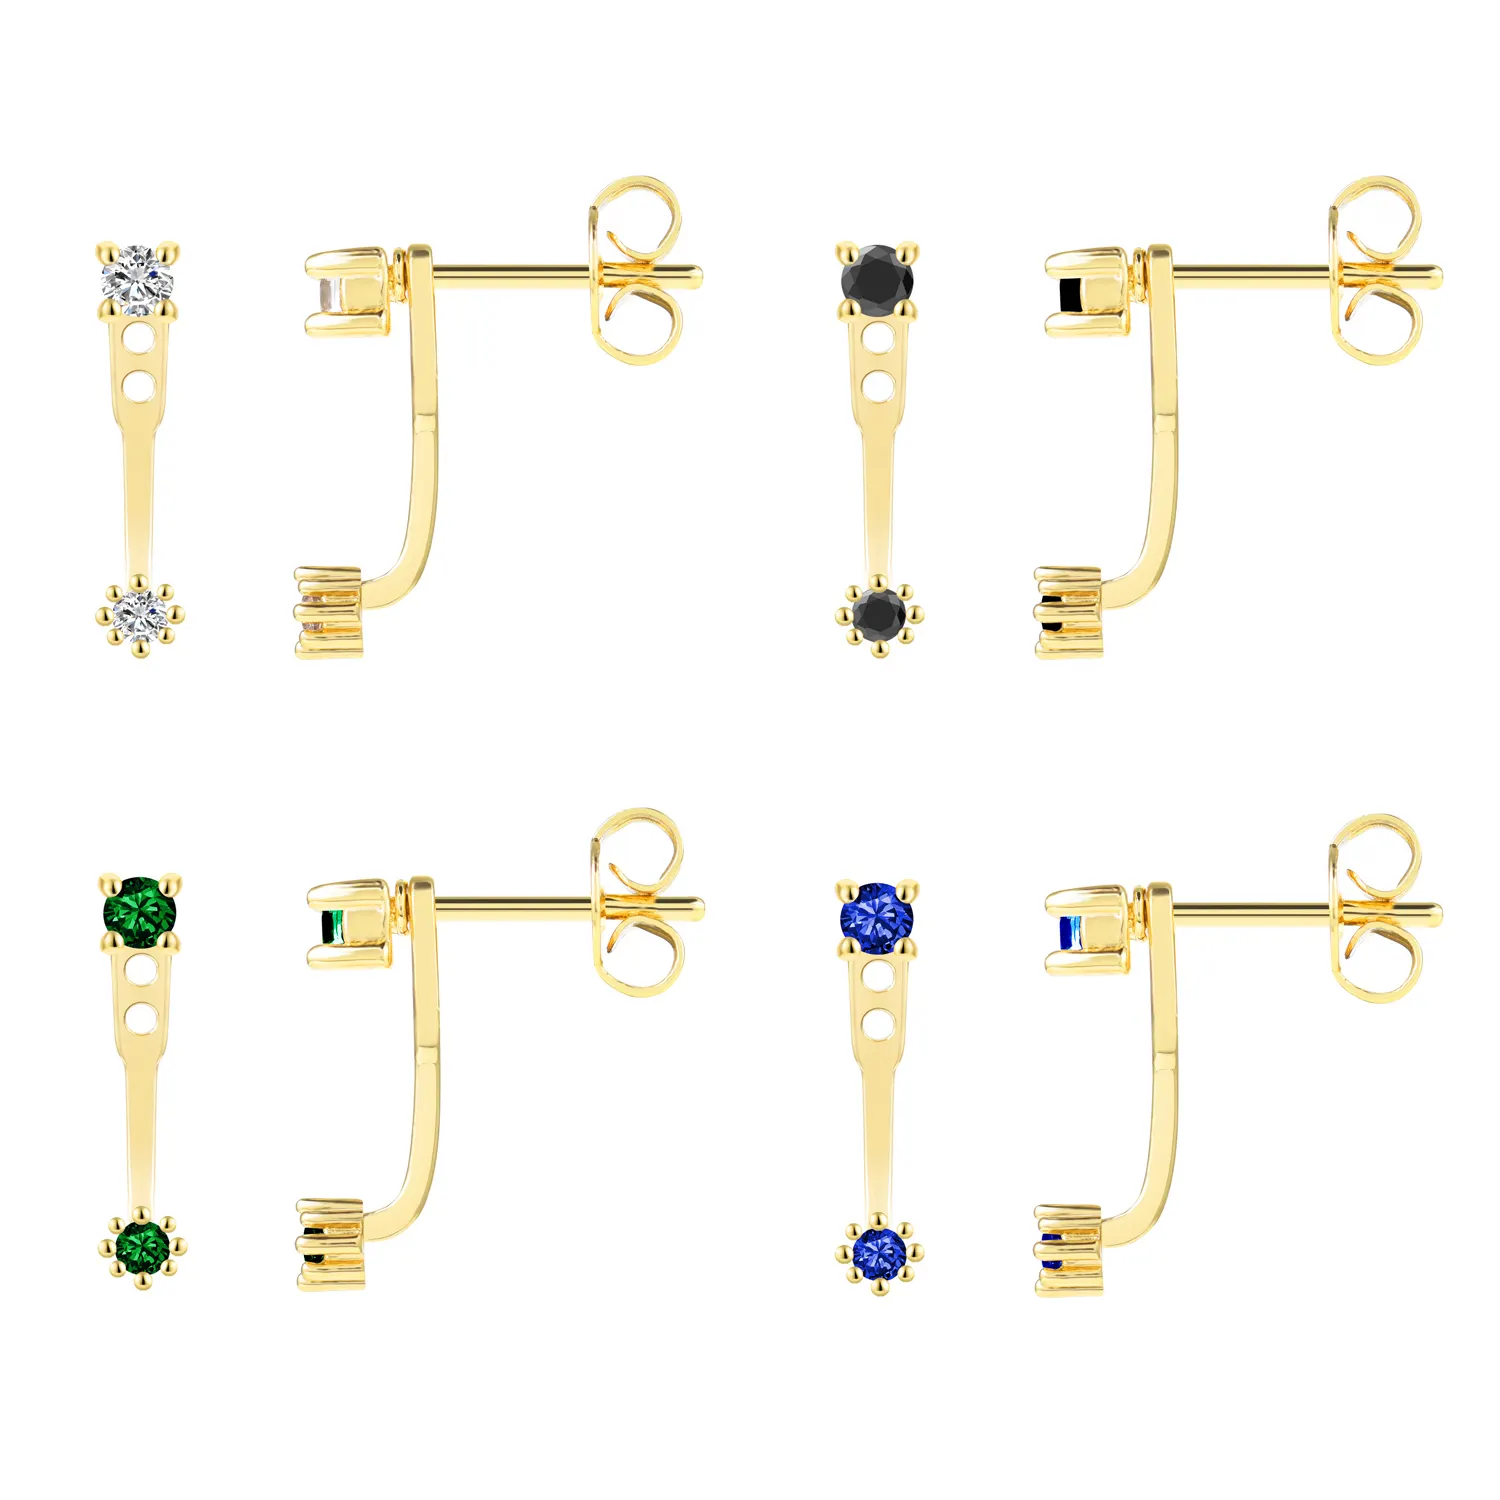 Stainless Steel Gold Plating Birthstone Sterilized Disposable Ear Piercing Gems Surgical Earring Studs Piercing Body Jewelry